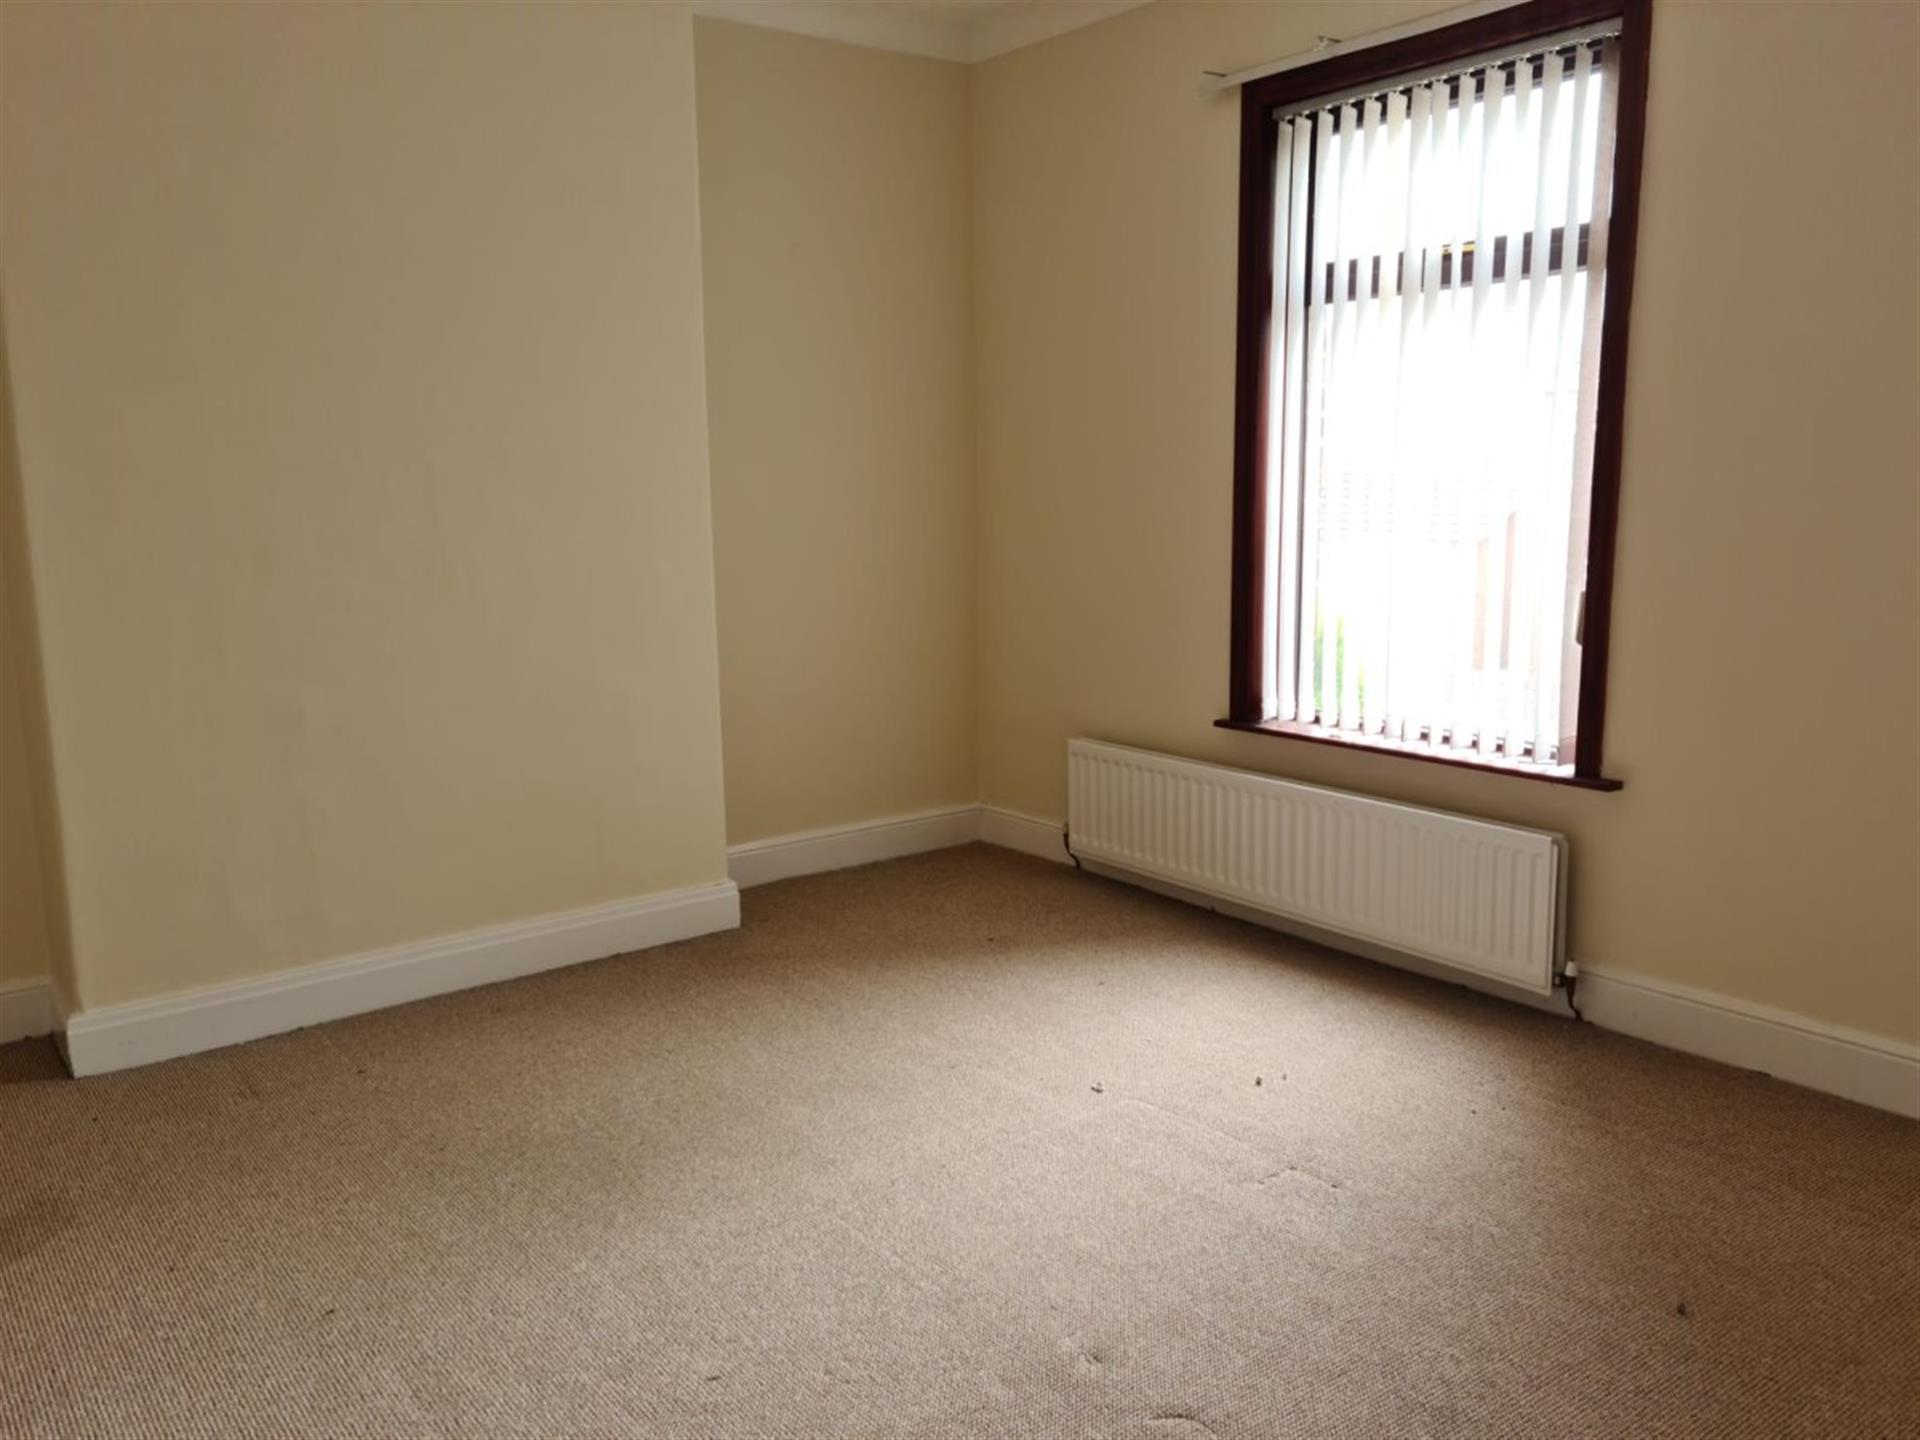 2 bedroom terraced house To Let in Bishop Auckland - photograph 9.